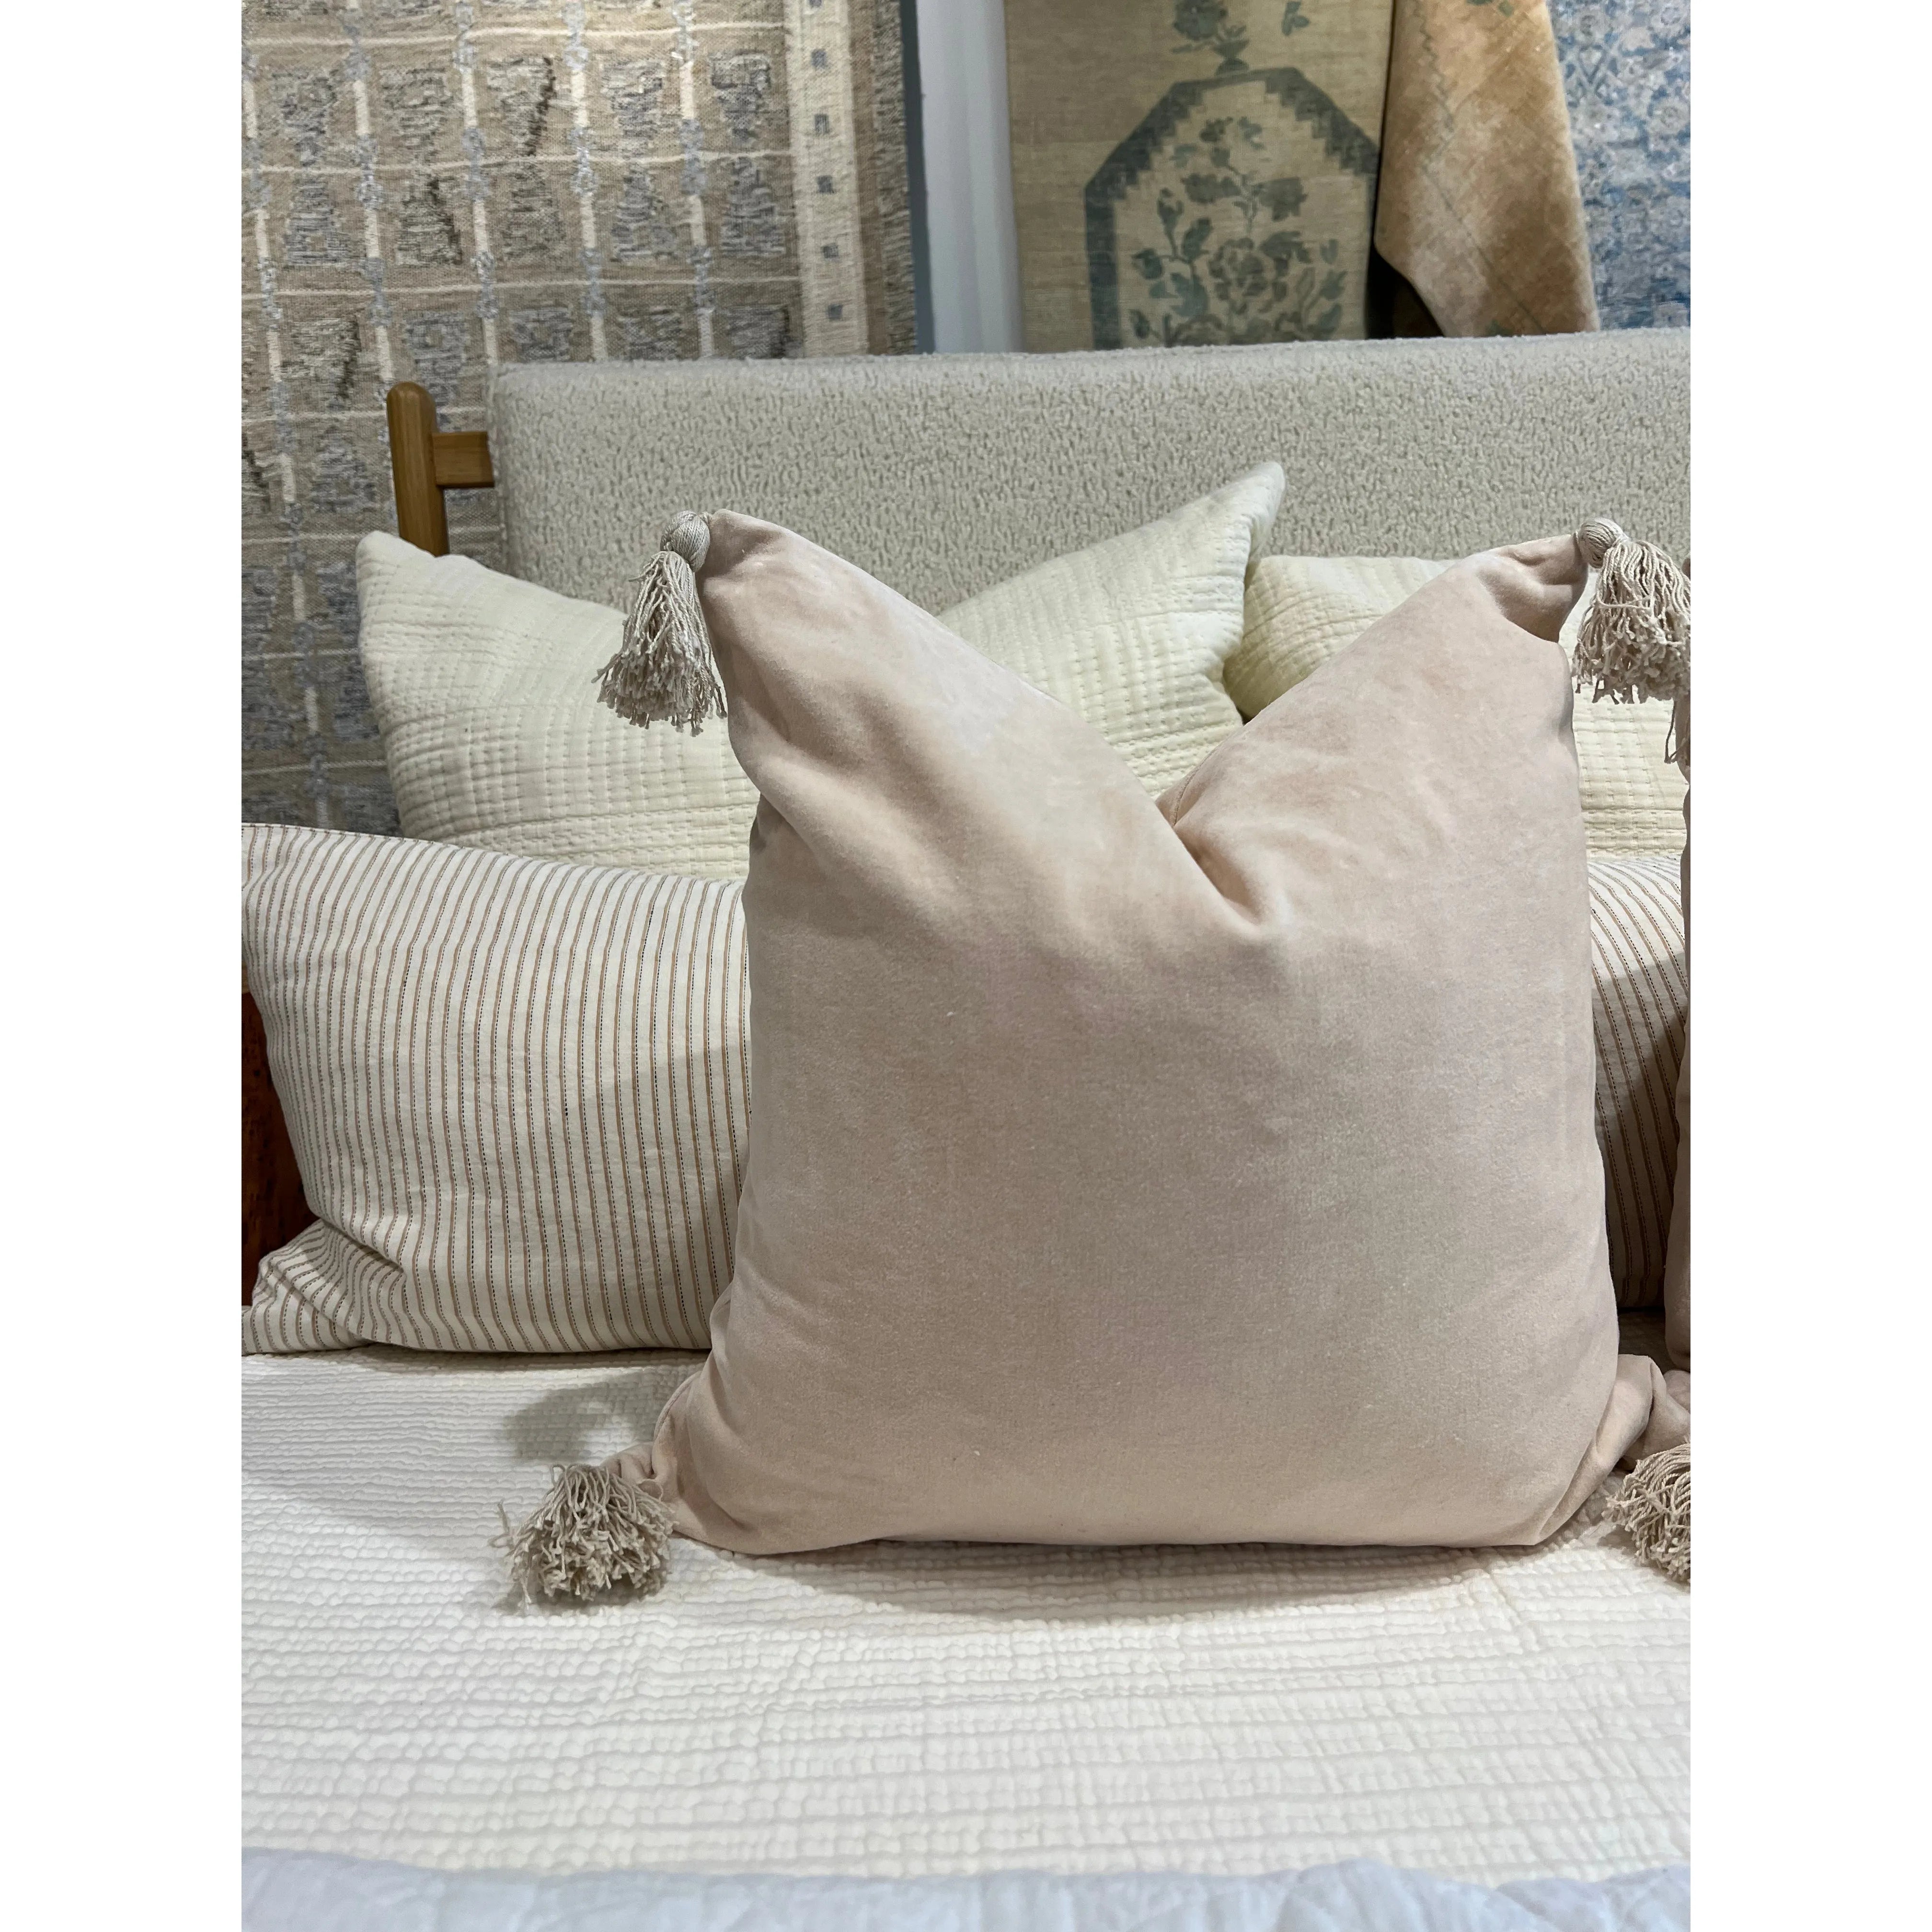 A sumptuously soft velvet square pillow with dainty tassels on each corner. King lounger 100% cotton. Amethyst Home provides interior design, new home construction design consulting, vintage area rugs, and lighting in the Omaha metro area.